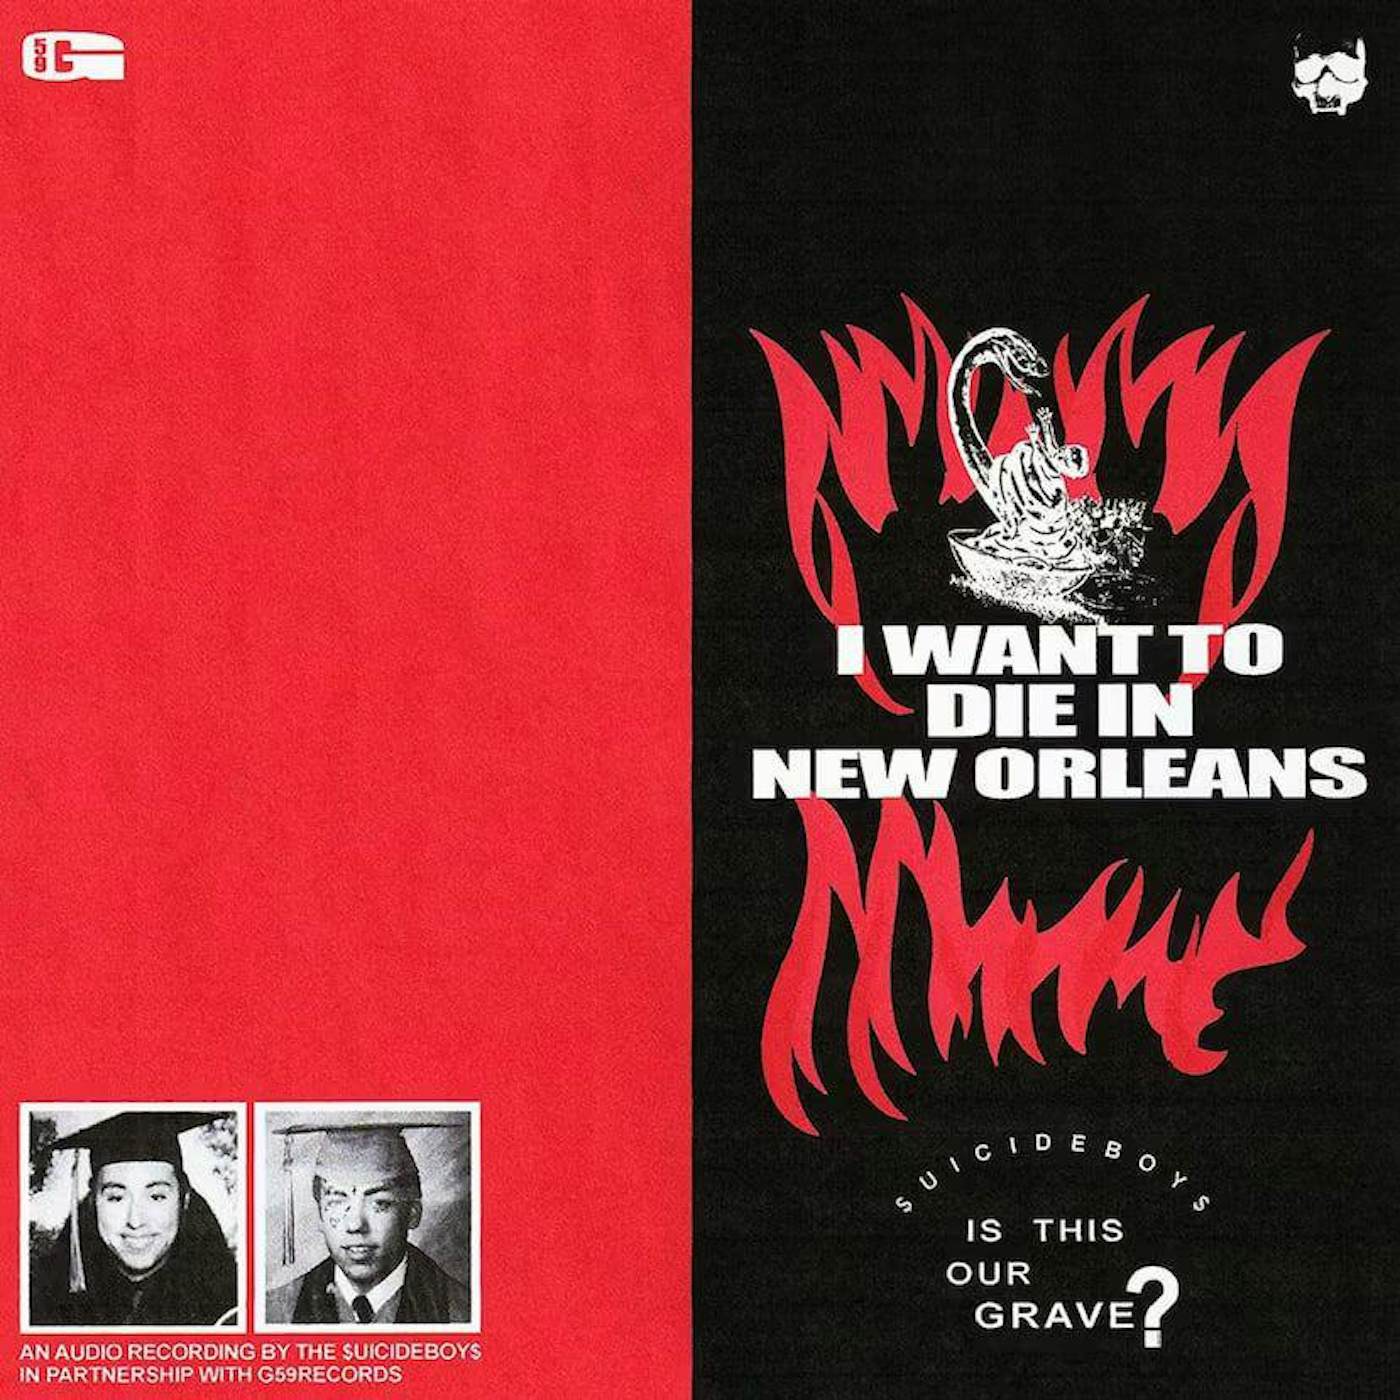 $uicideboy$ I Want To Die In New Orleans (Silver) Vinyl Record